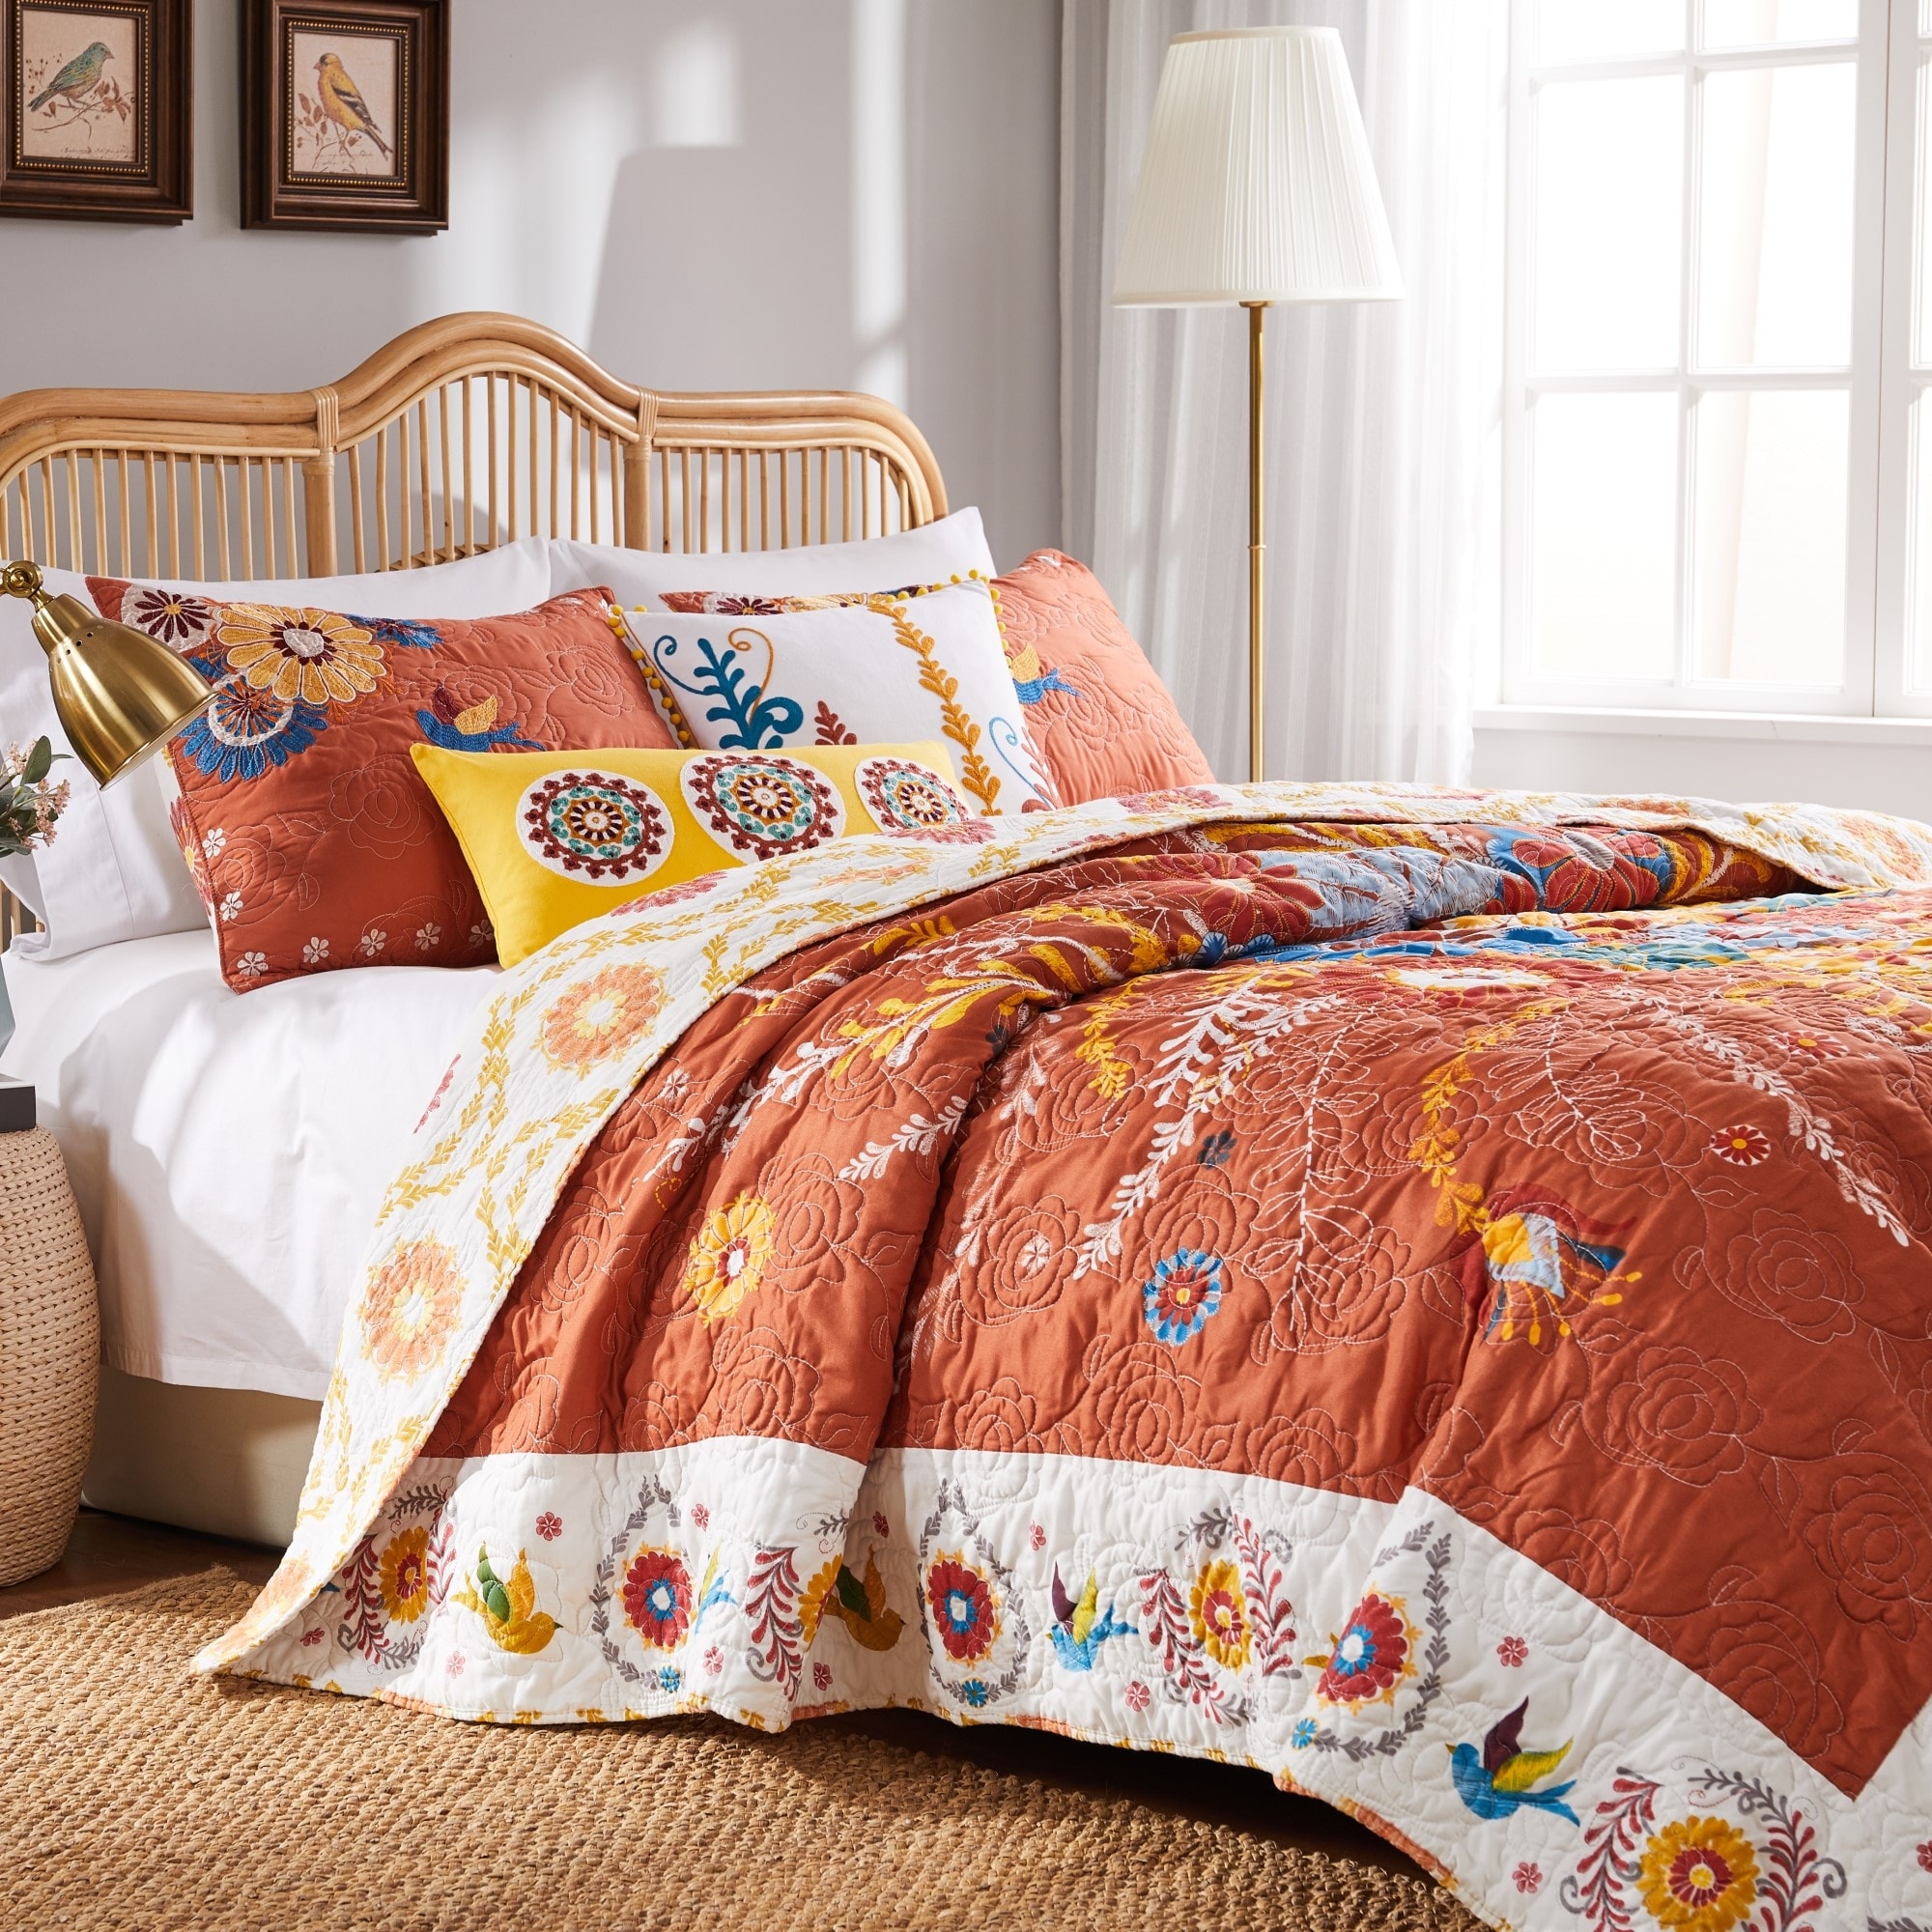 https://ak1.ostkcdn.com/images/products/is/images/direct/c00b488a2041c60e195938052fce2b6e0e143f49/Barefoot-Bungalow-Topanga-Orange-Bohemian-Floral-Quilted-Bedspread-Set.jpg